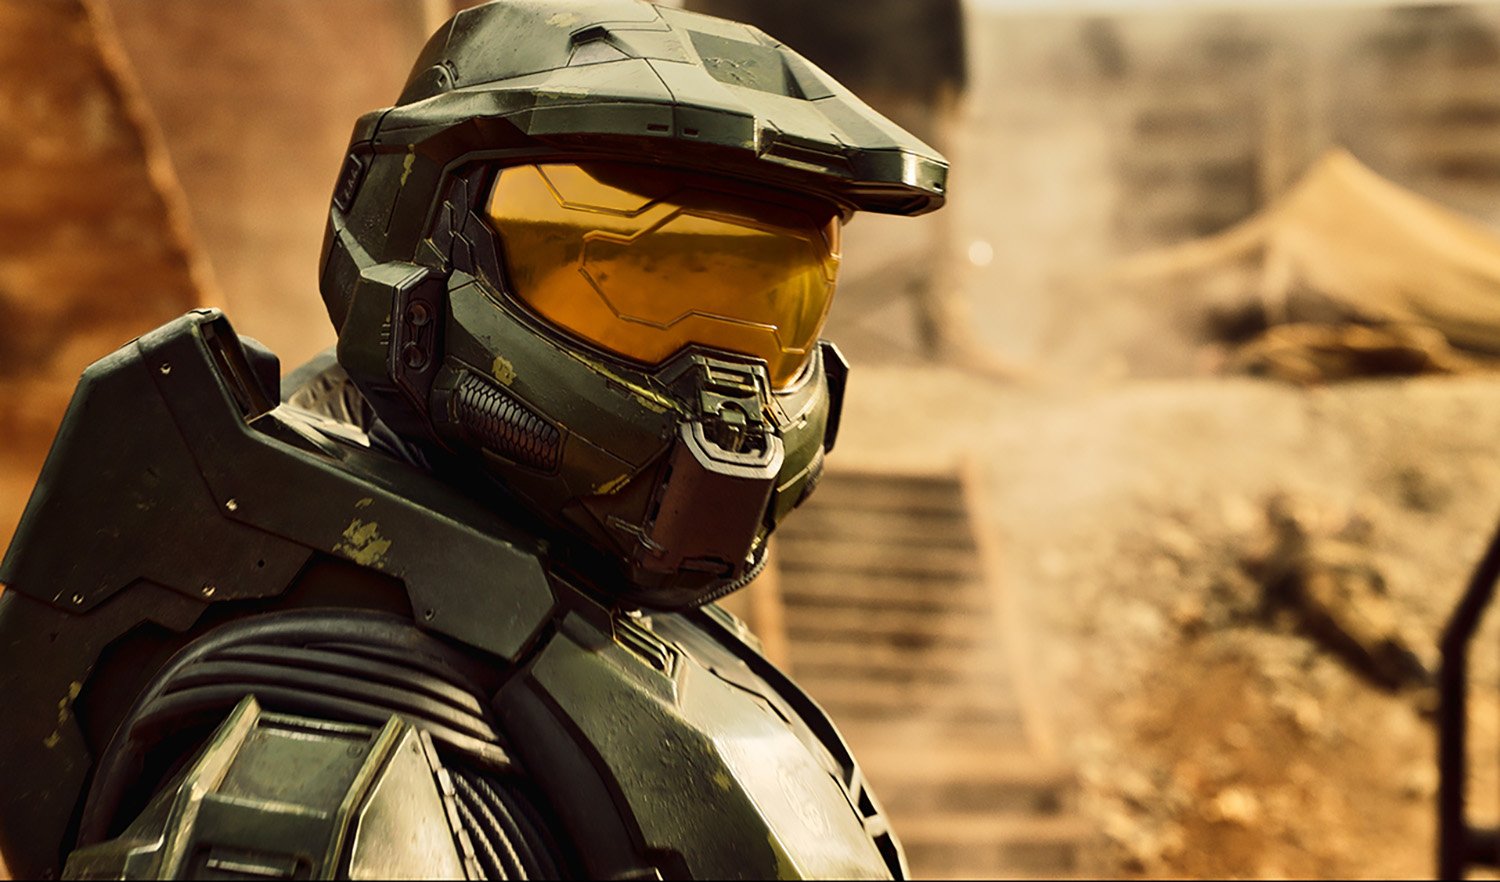 Halo TV series: Release date, trailer, and everything we know